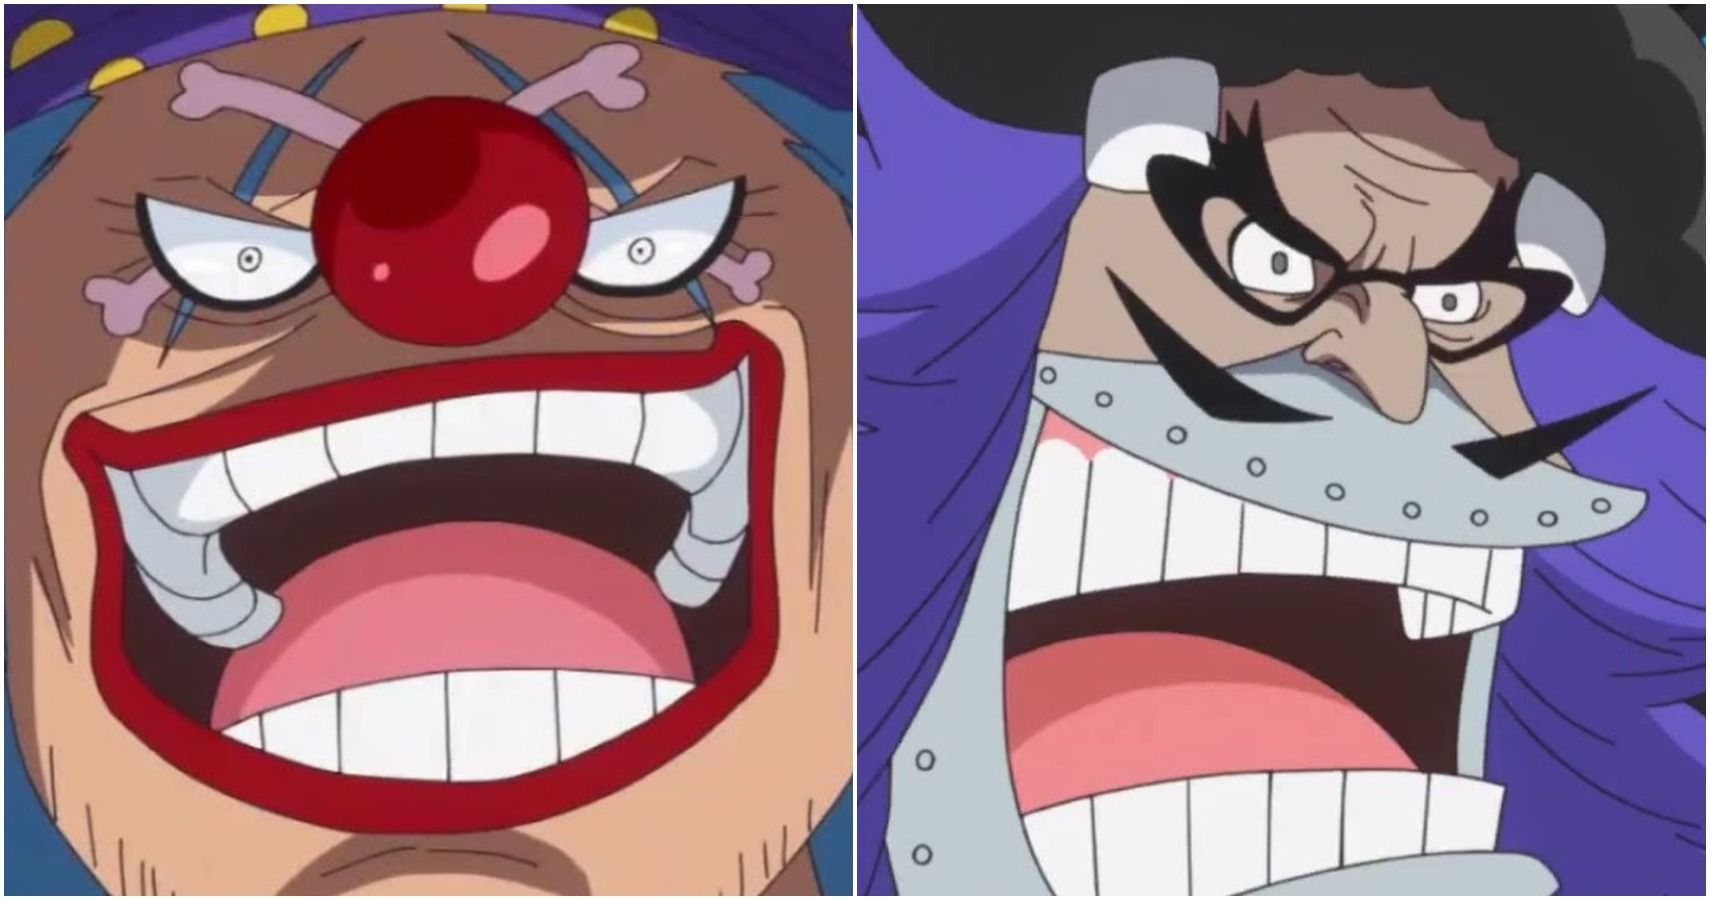 Which Devil Fruits in One Piece have incompetent users? - Quora